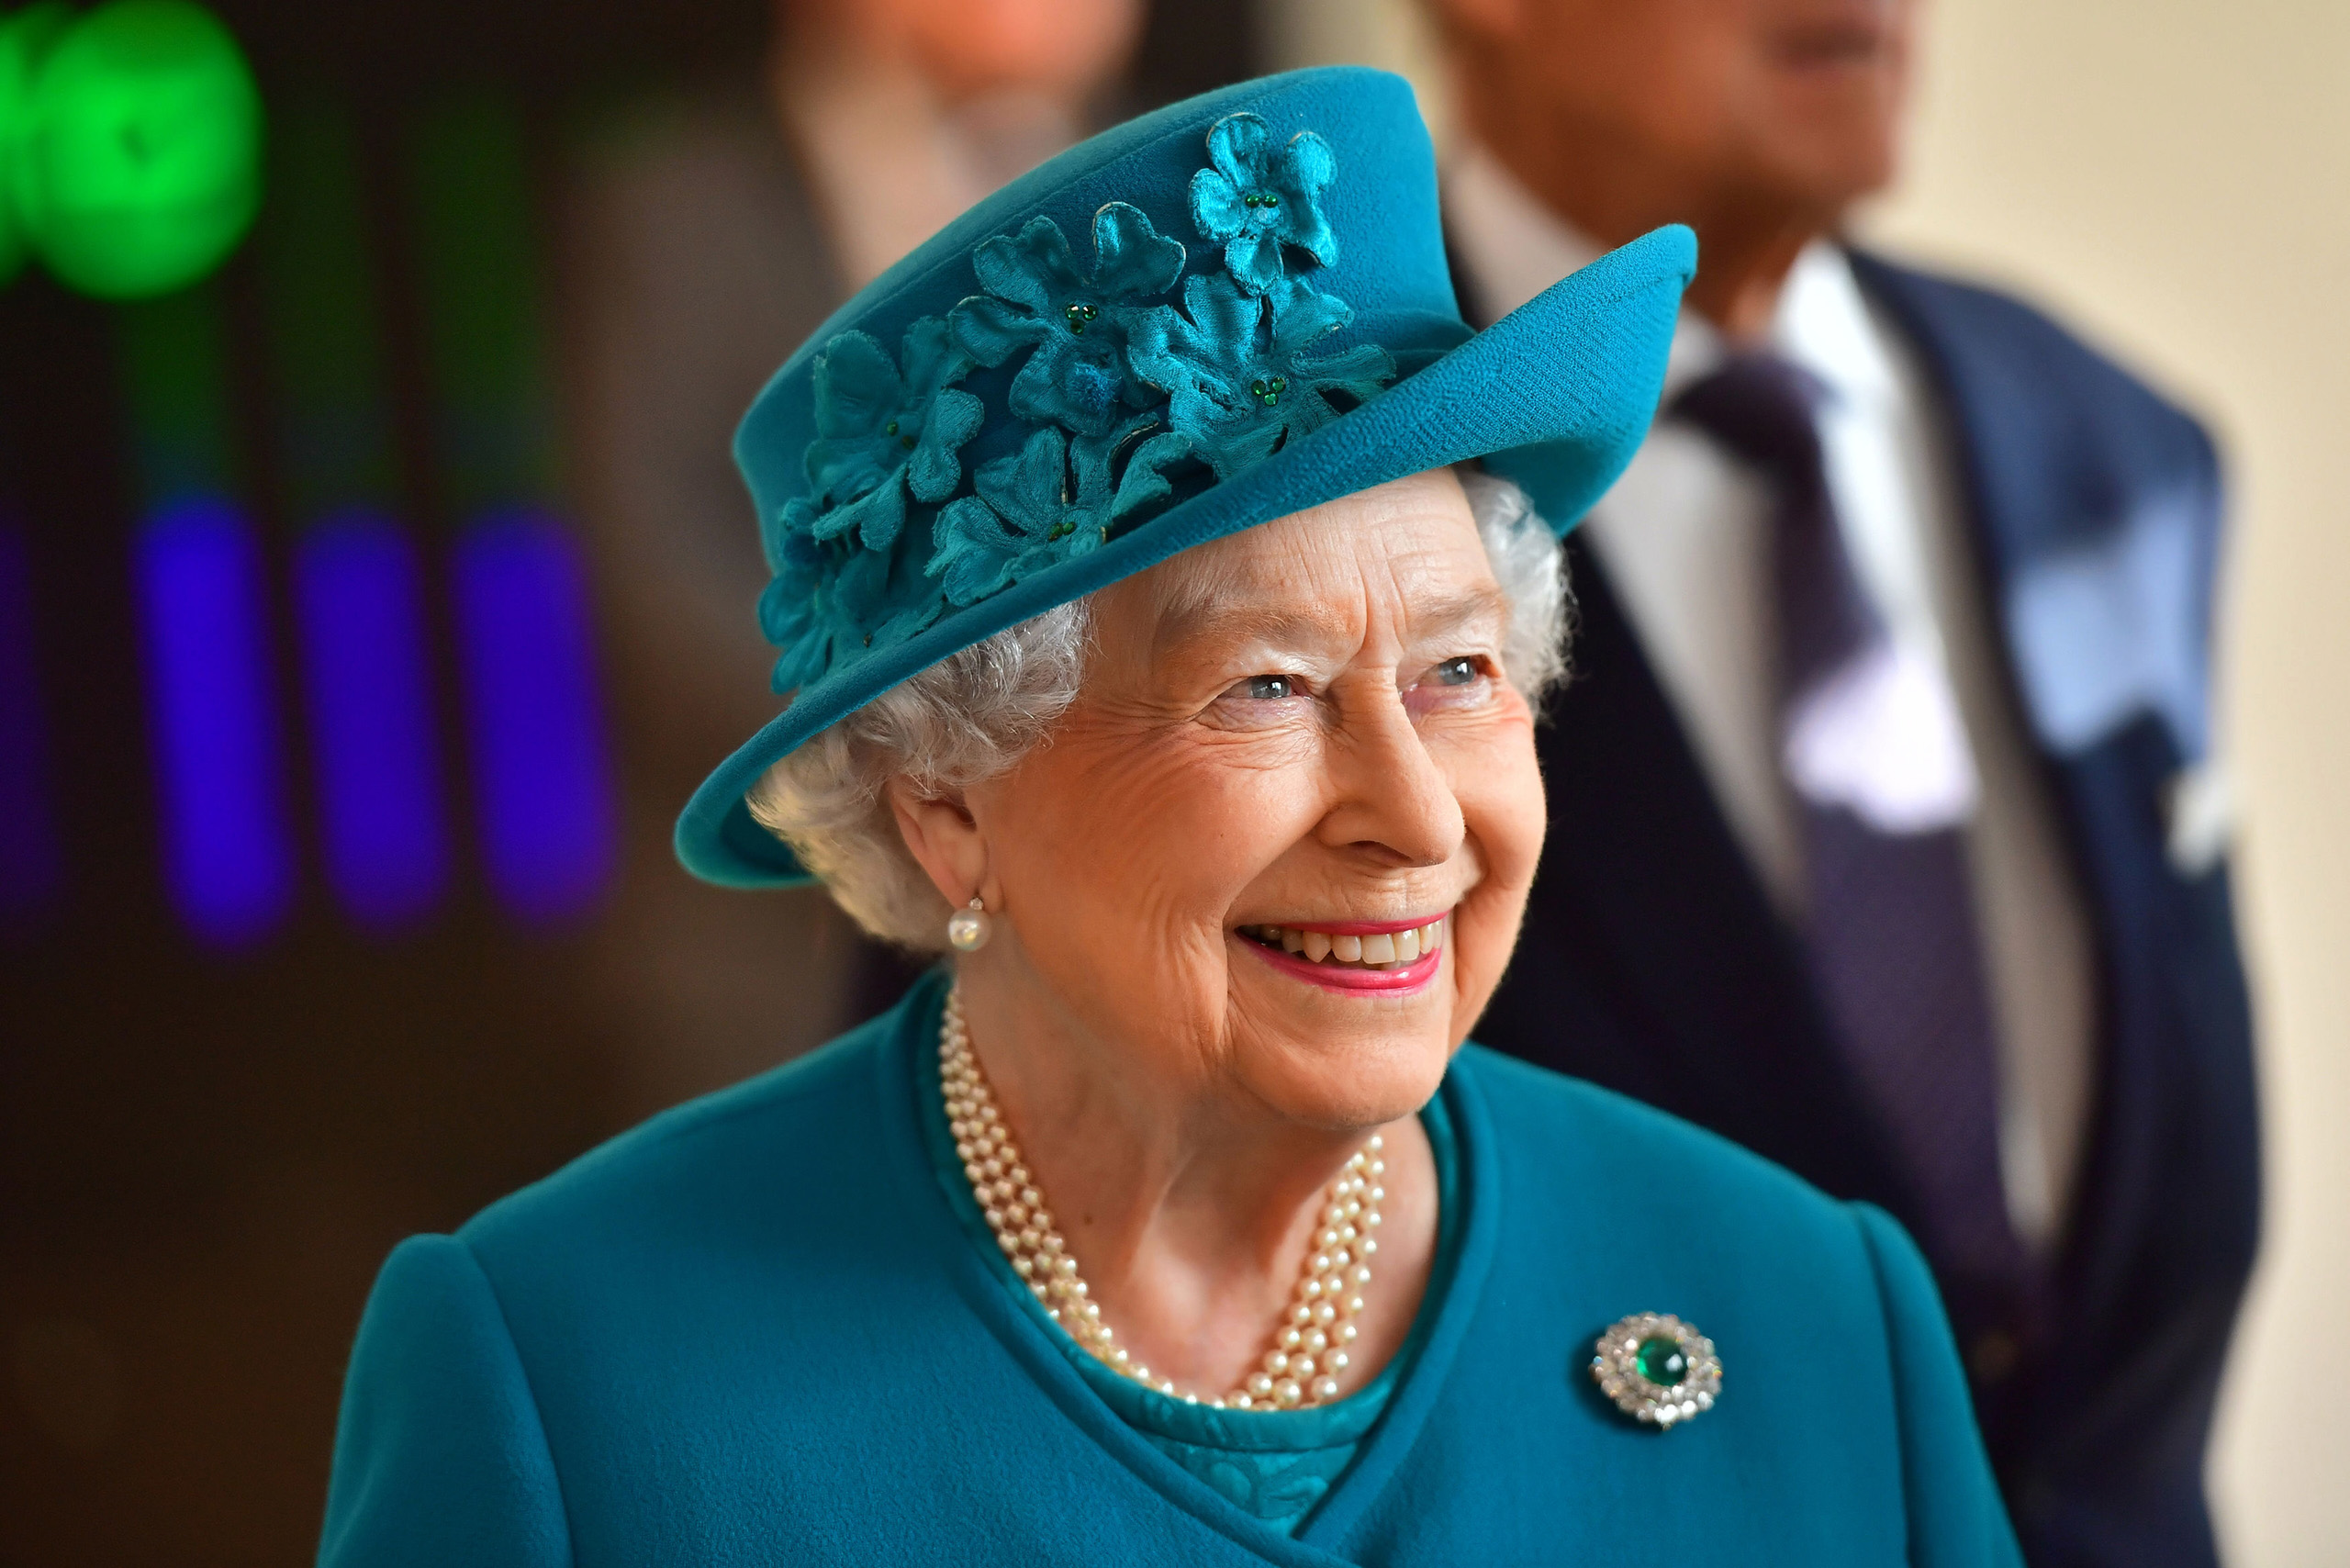 Britain's Queen Elizabeth II arrives to attend the opening of the National Cyber Security Centre in London on February 14, 2017. Queen Elizabeth II inaugurated Britain's National Cyber Security Centre on Tuesday, spearheading the country's efforts to combat a growing wave of cyber attacks notably from Russia. / AFP / POOL / Dominic Lipinski (Photo credit should read DOMINIC LIPINSKI/AFP/Getty Images)